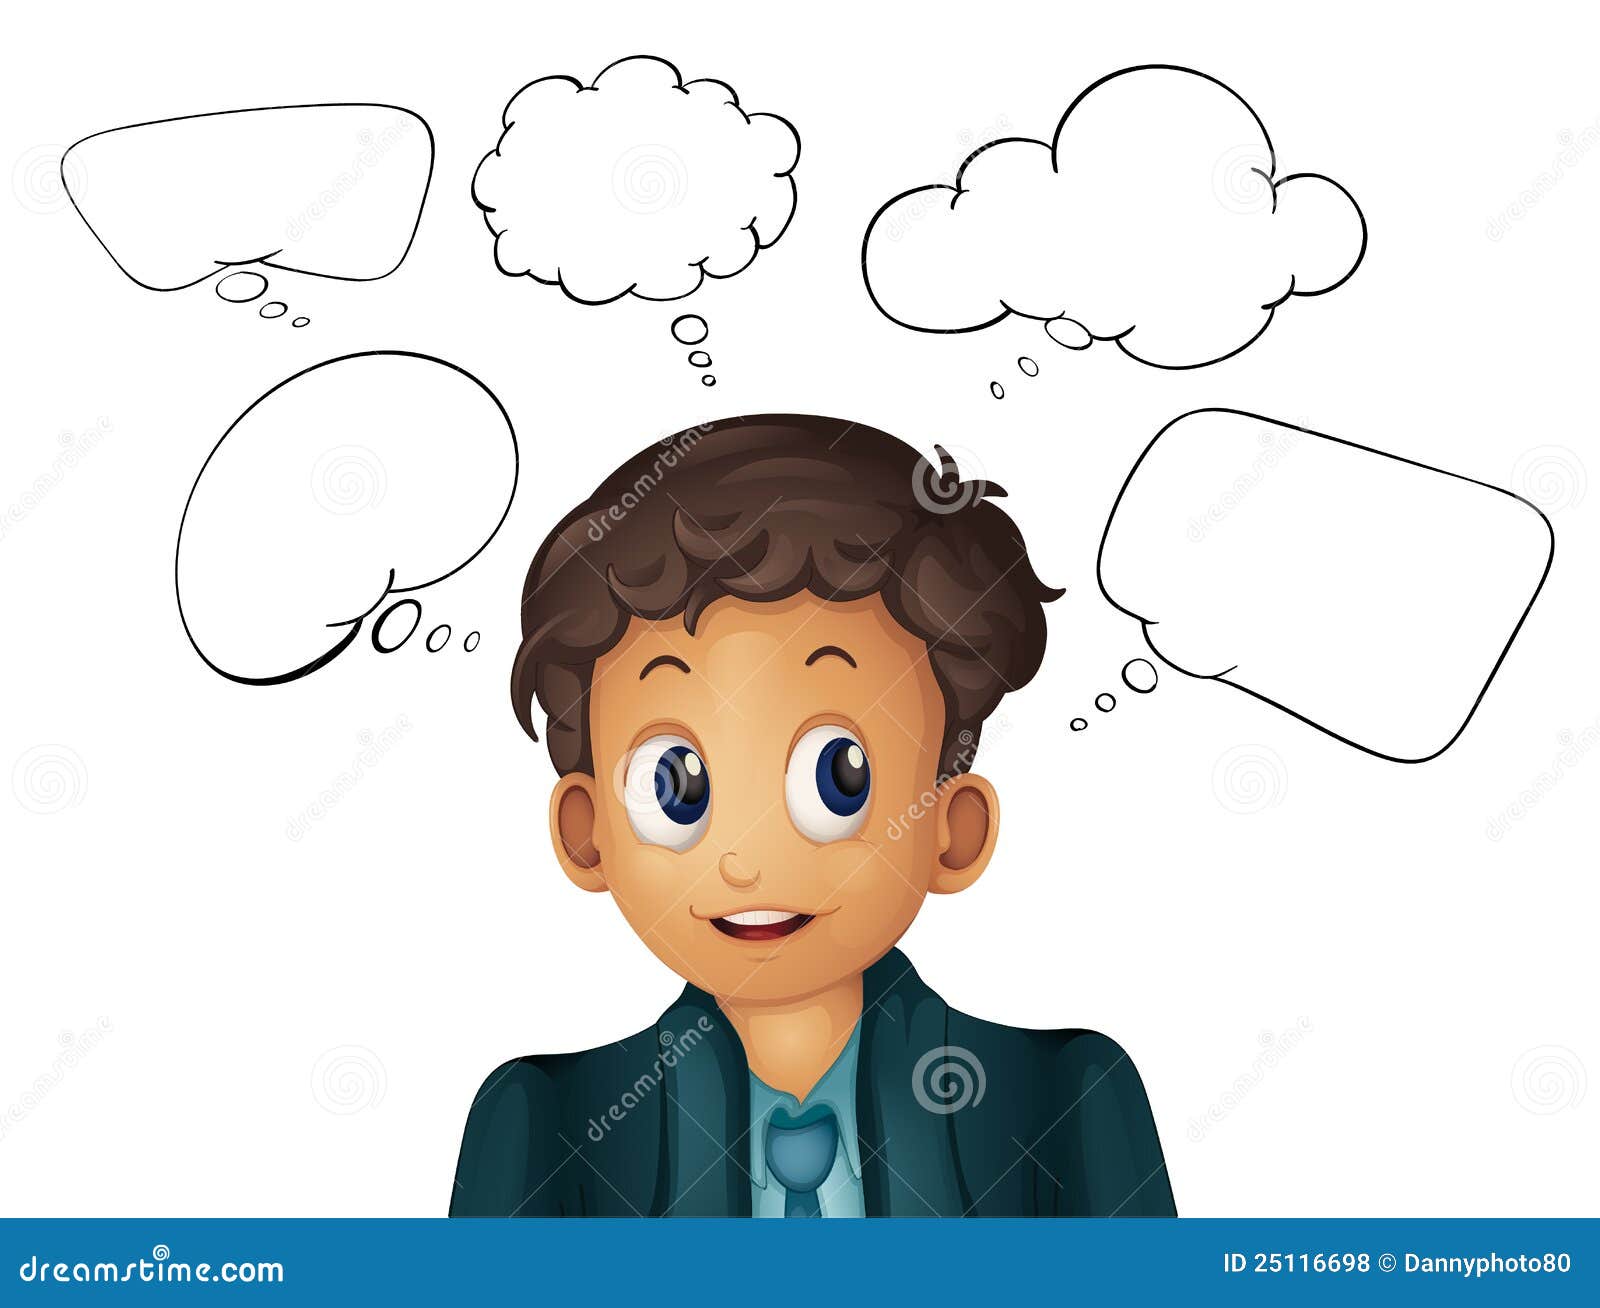 clipart of businessman thinking - photo #14